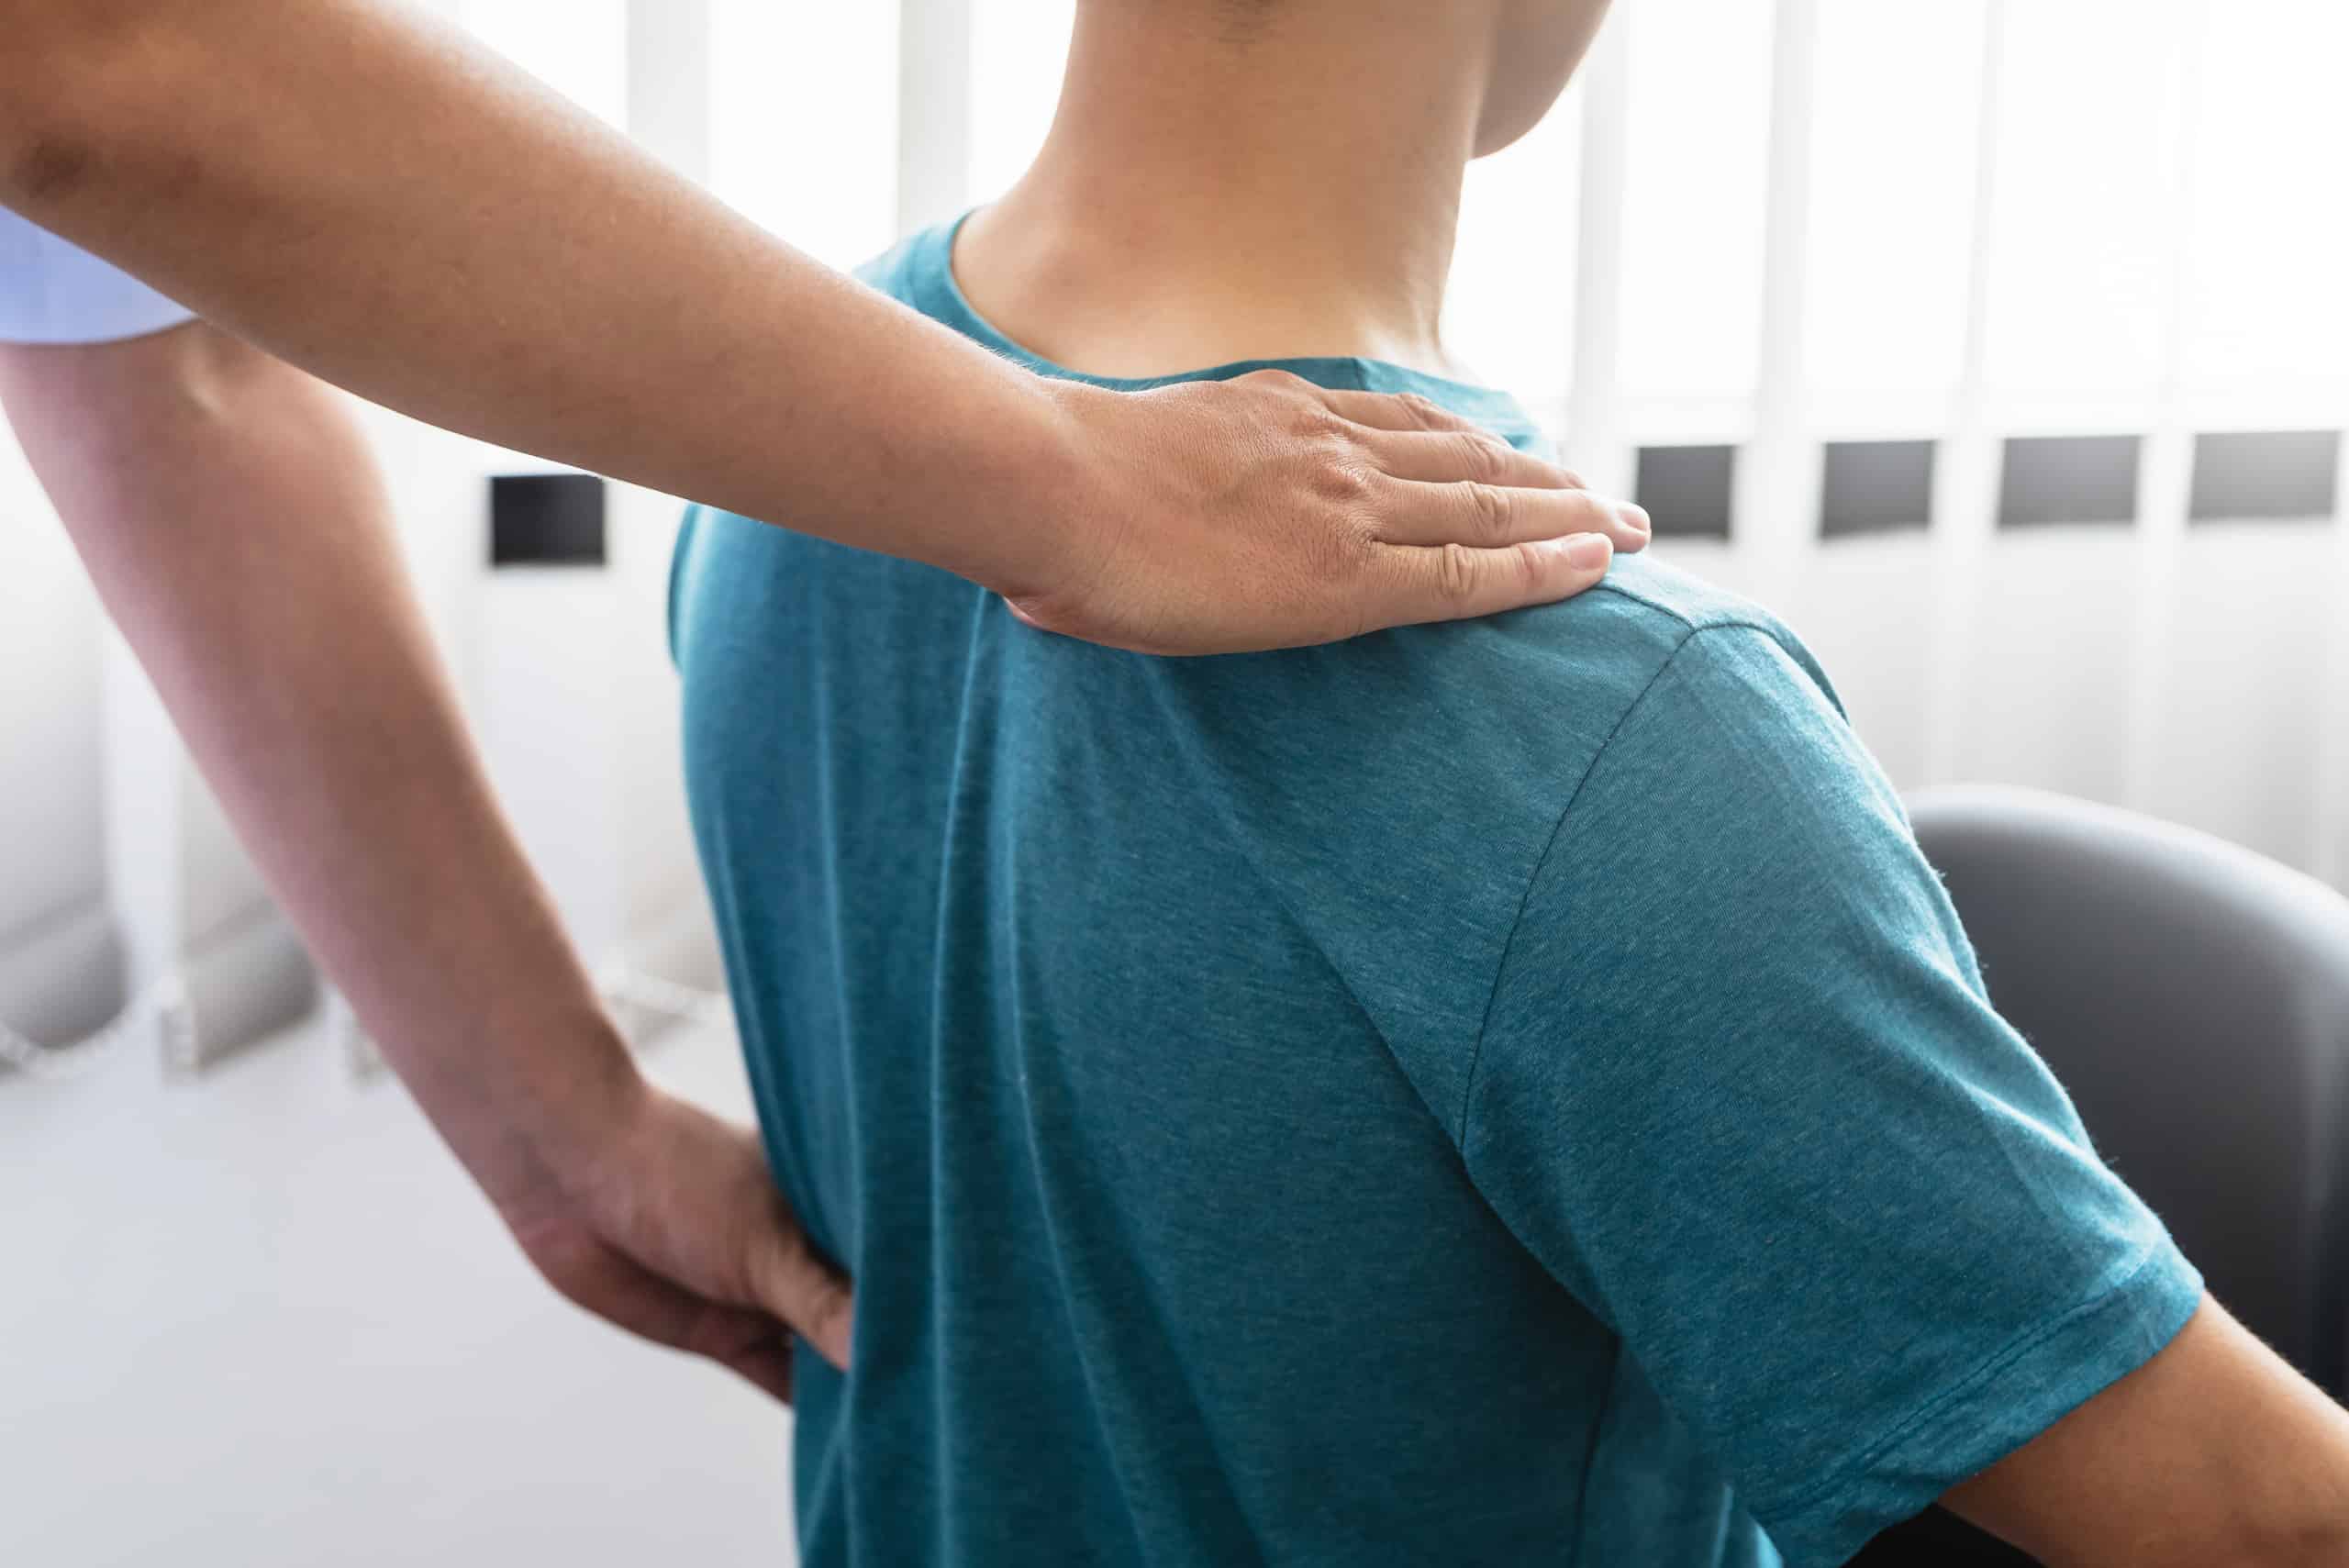 Acupressure for Back Pain Relief: Top Points to Press for a Pain-Free Spine